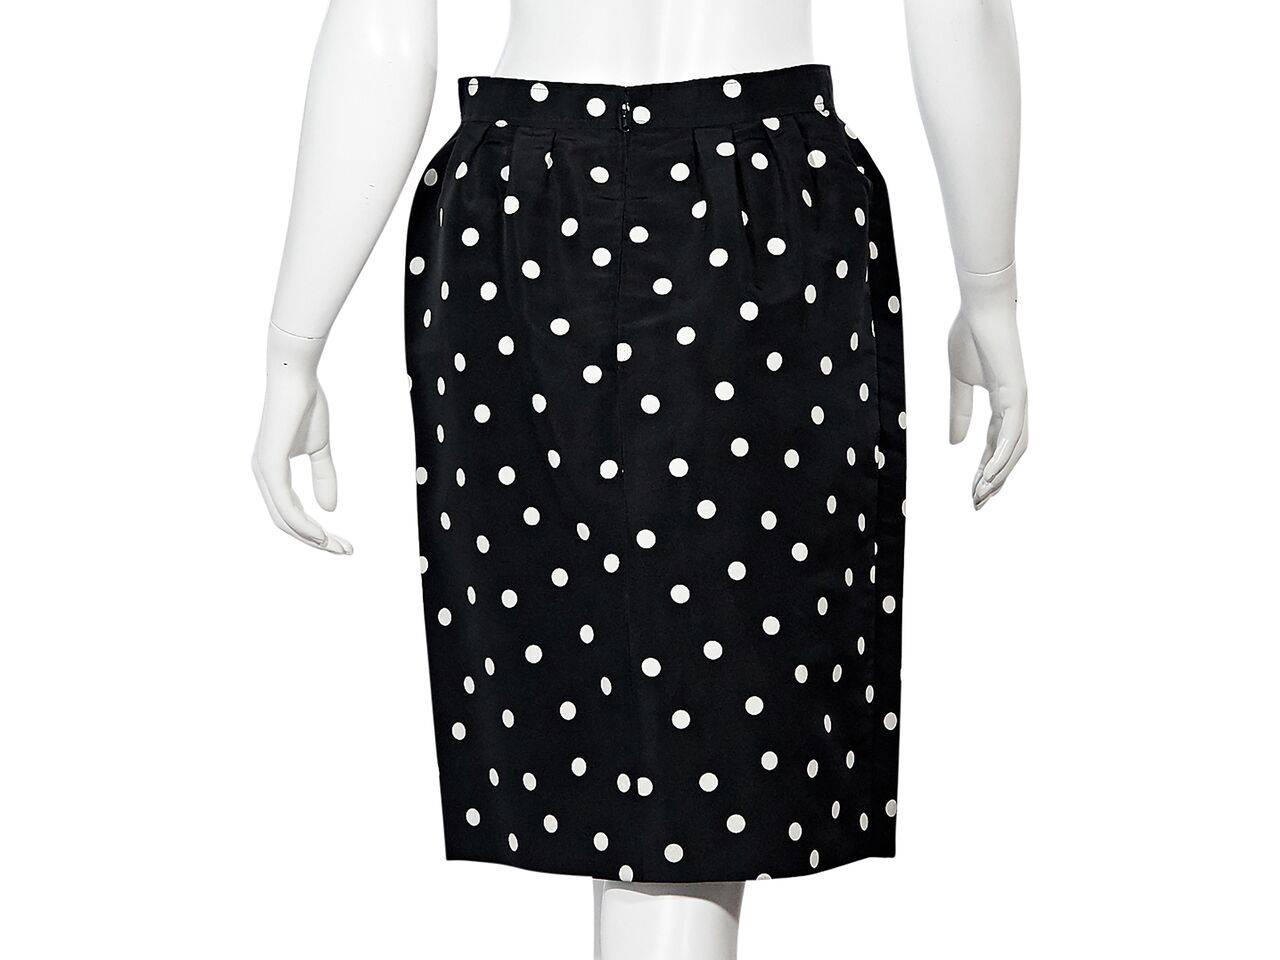 Product details:  Vintage black and white polka dot skirt by Chanel.  Banded waist.  Concealed back zip closure.  
Condition: Pre-owned. Very good.  
Est. Retail $998.00